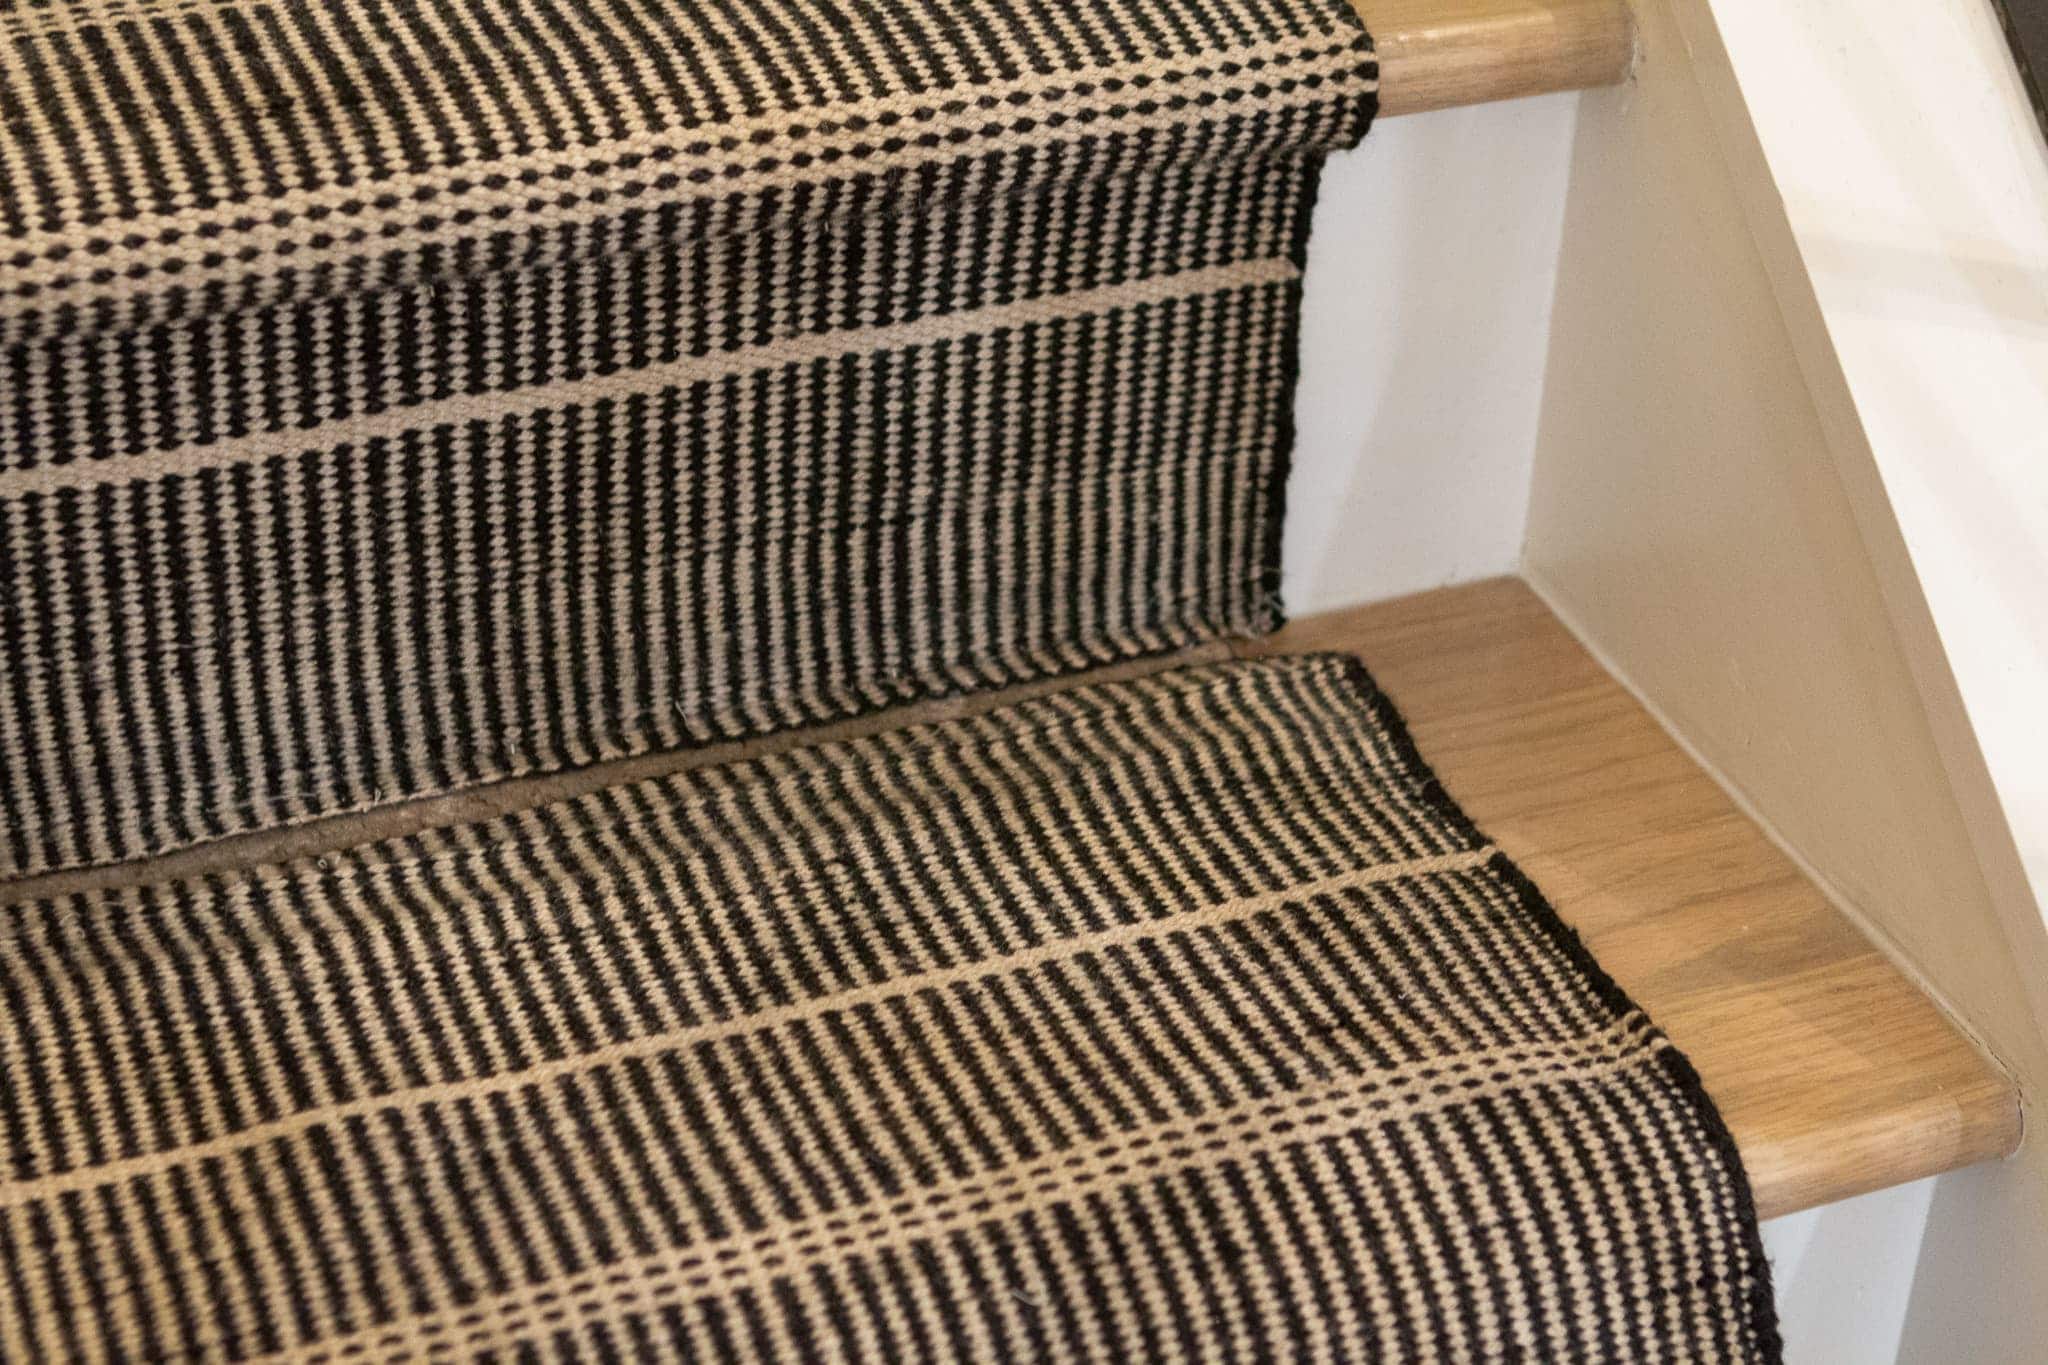 How to install a stair runner